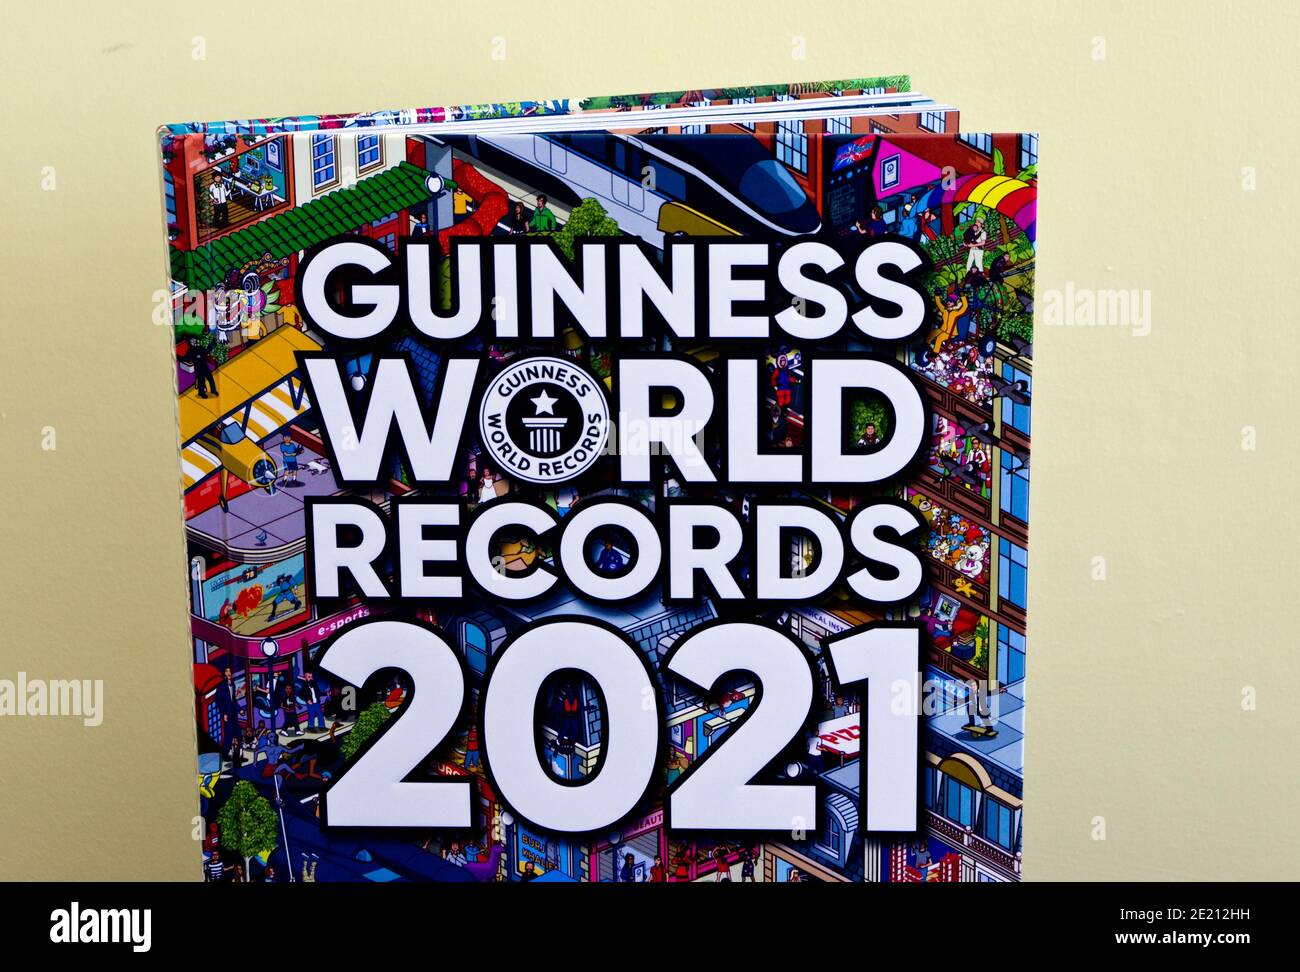 Book Of Guinness World Records 2021 Annual, UK Stock Photo